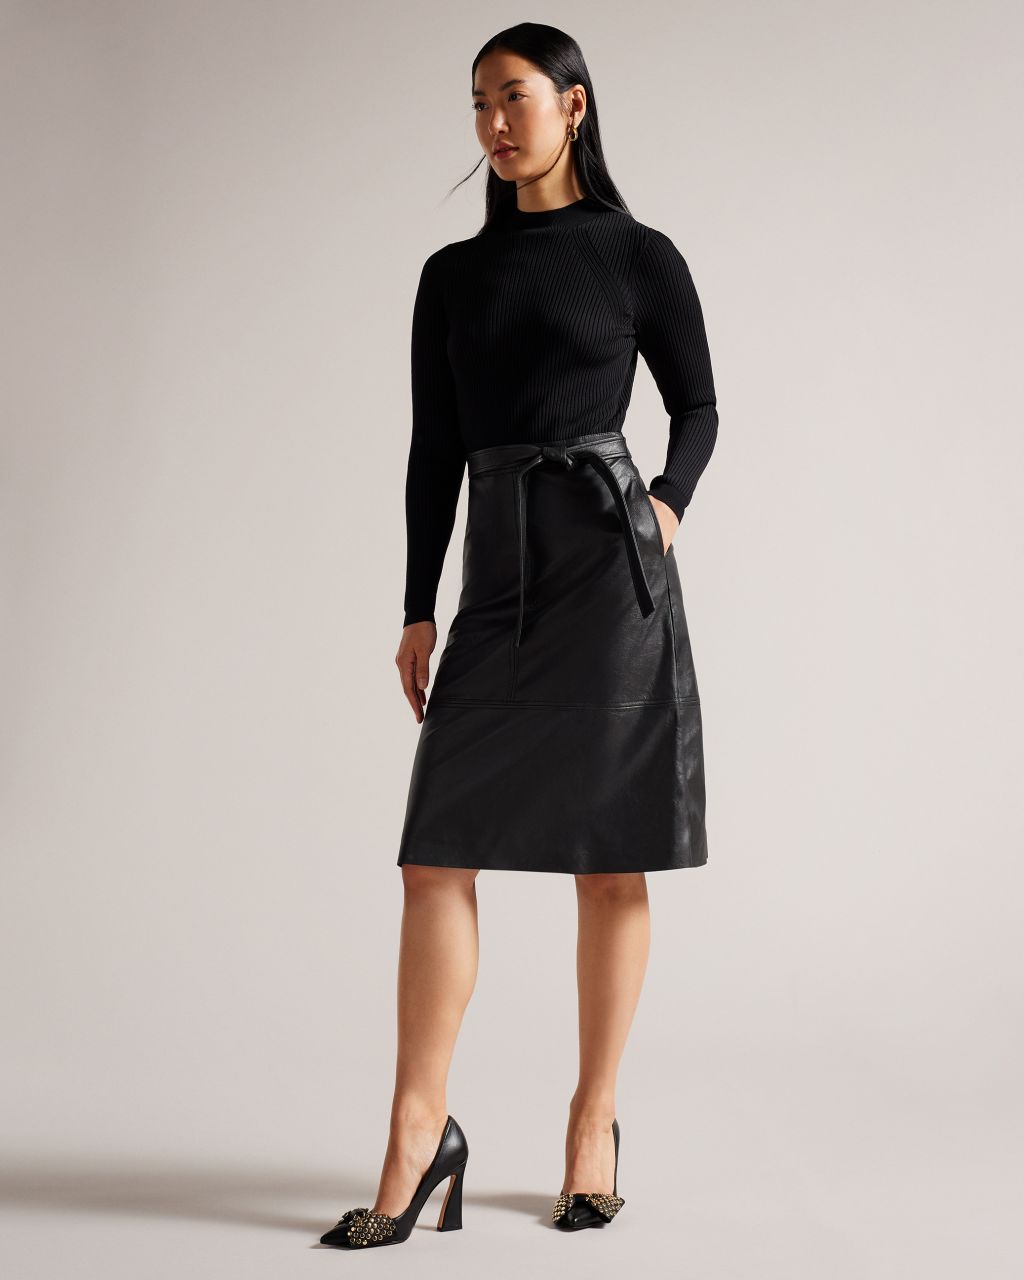 Ted Baker Women's Knitted Bodice Dress With Pleather Skirt in Black, Alltaa